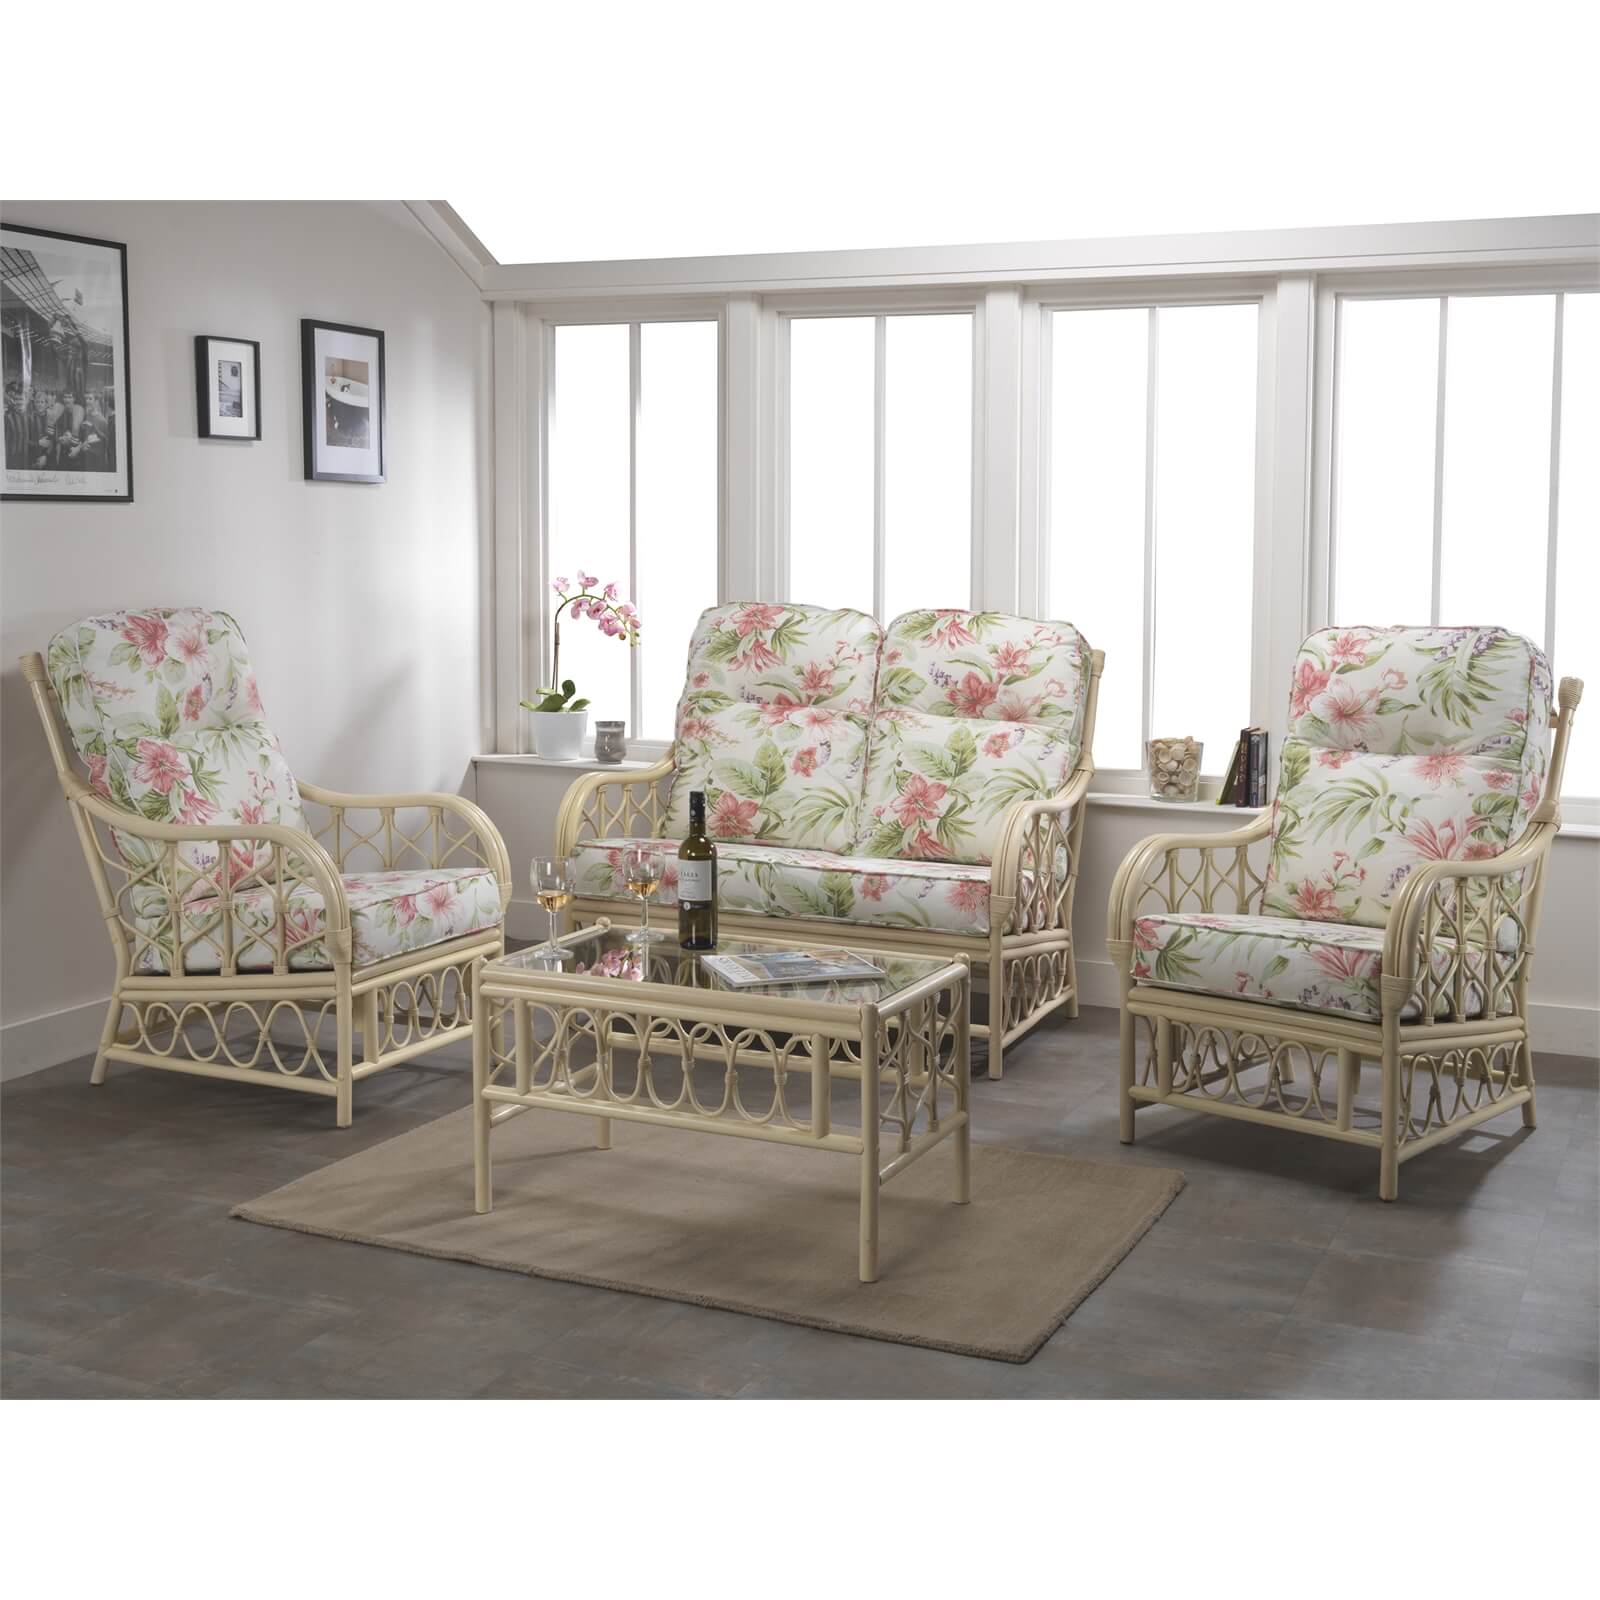 Morley 2 Seater Sofa In Blossom